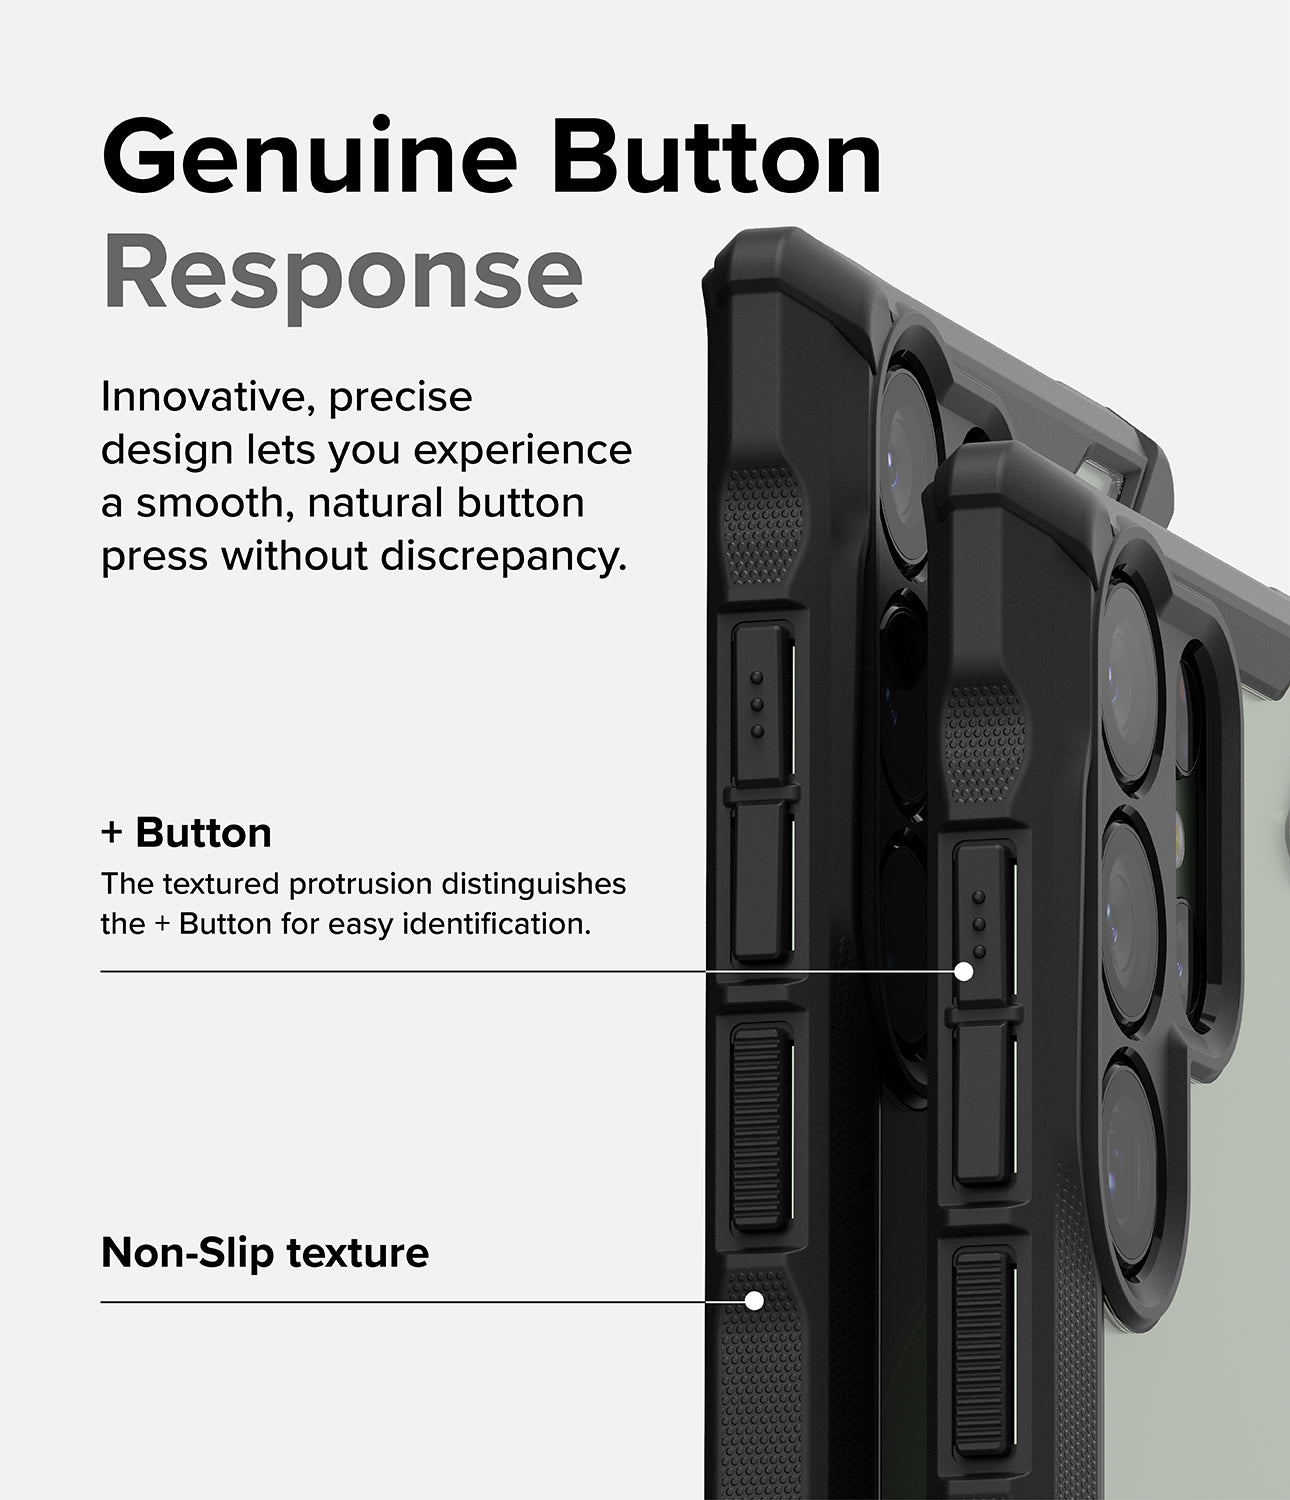 Galaxy S23 Ultra Case | Fusion-X - Black - Genuine Button Response. Innovative, precise design lets you experience a smooth, natural button press without discrepancy. + Button. The textured protrusion distinguishes the + Button for easy identification. Non-Slip Texture.